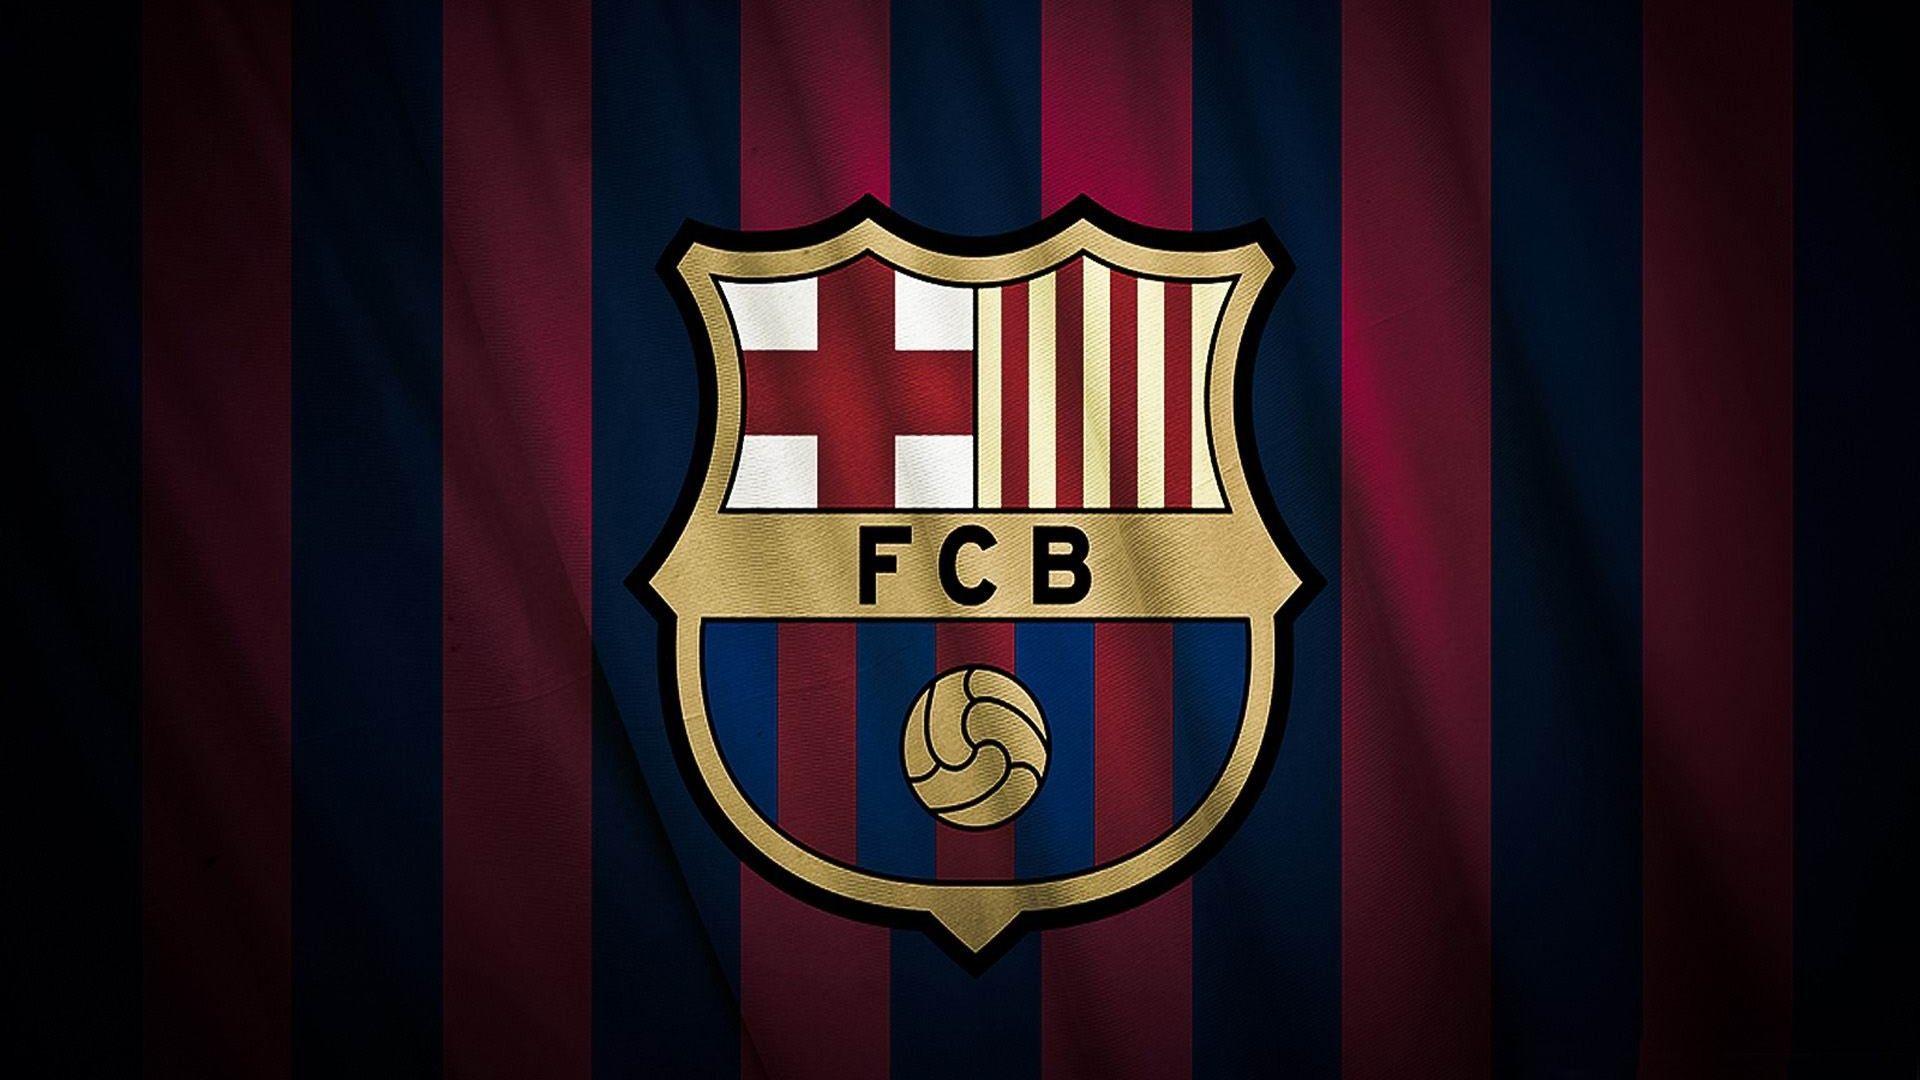 New Barcelona Football Logo 2013 Full HD Wallpaper. Places to Visit